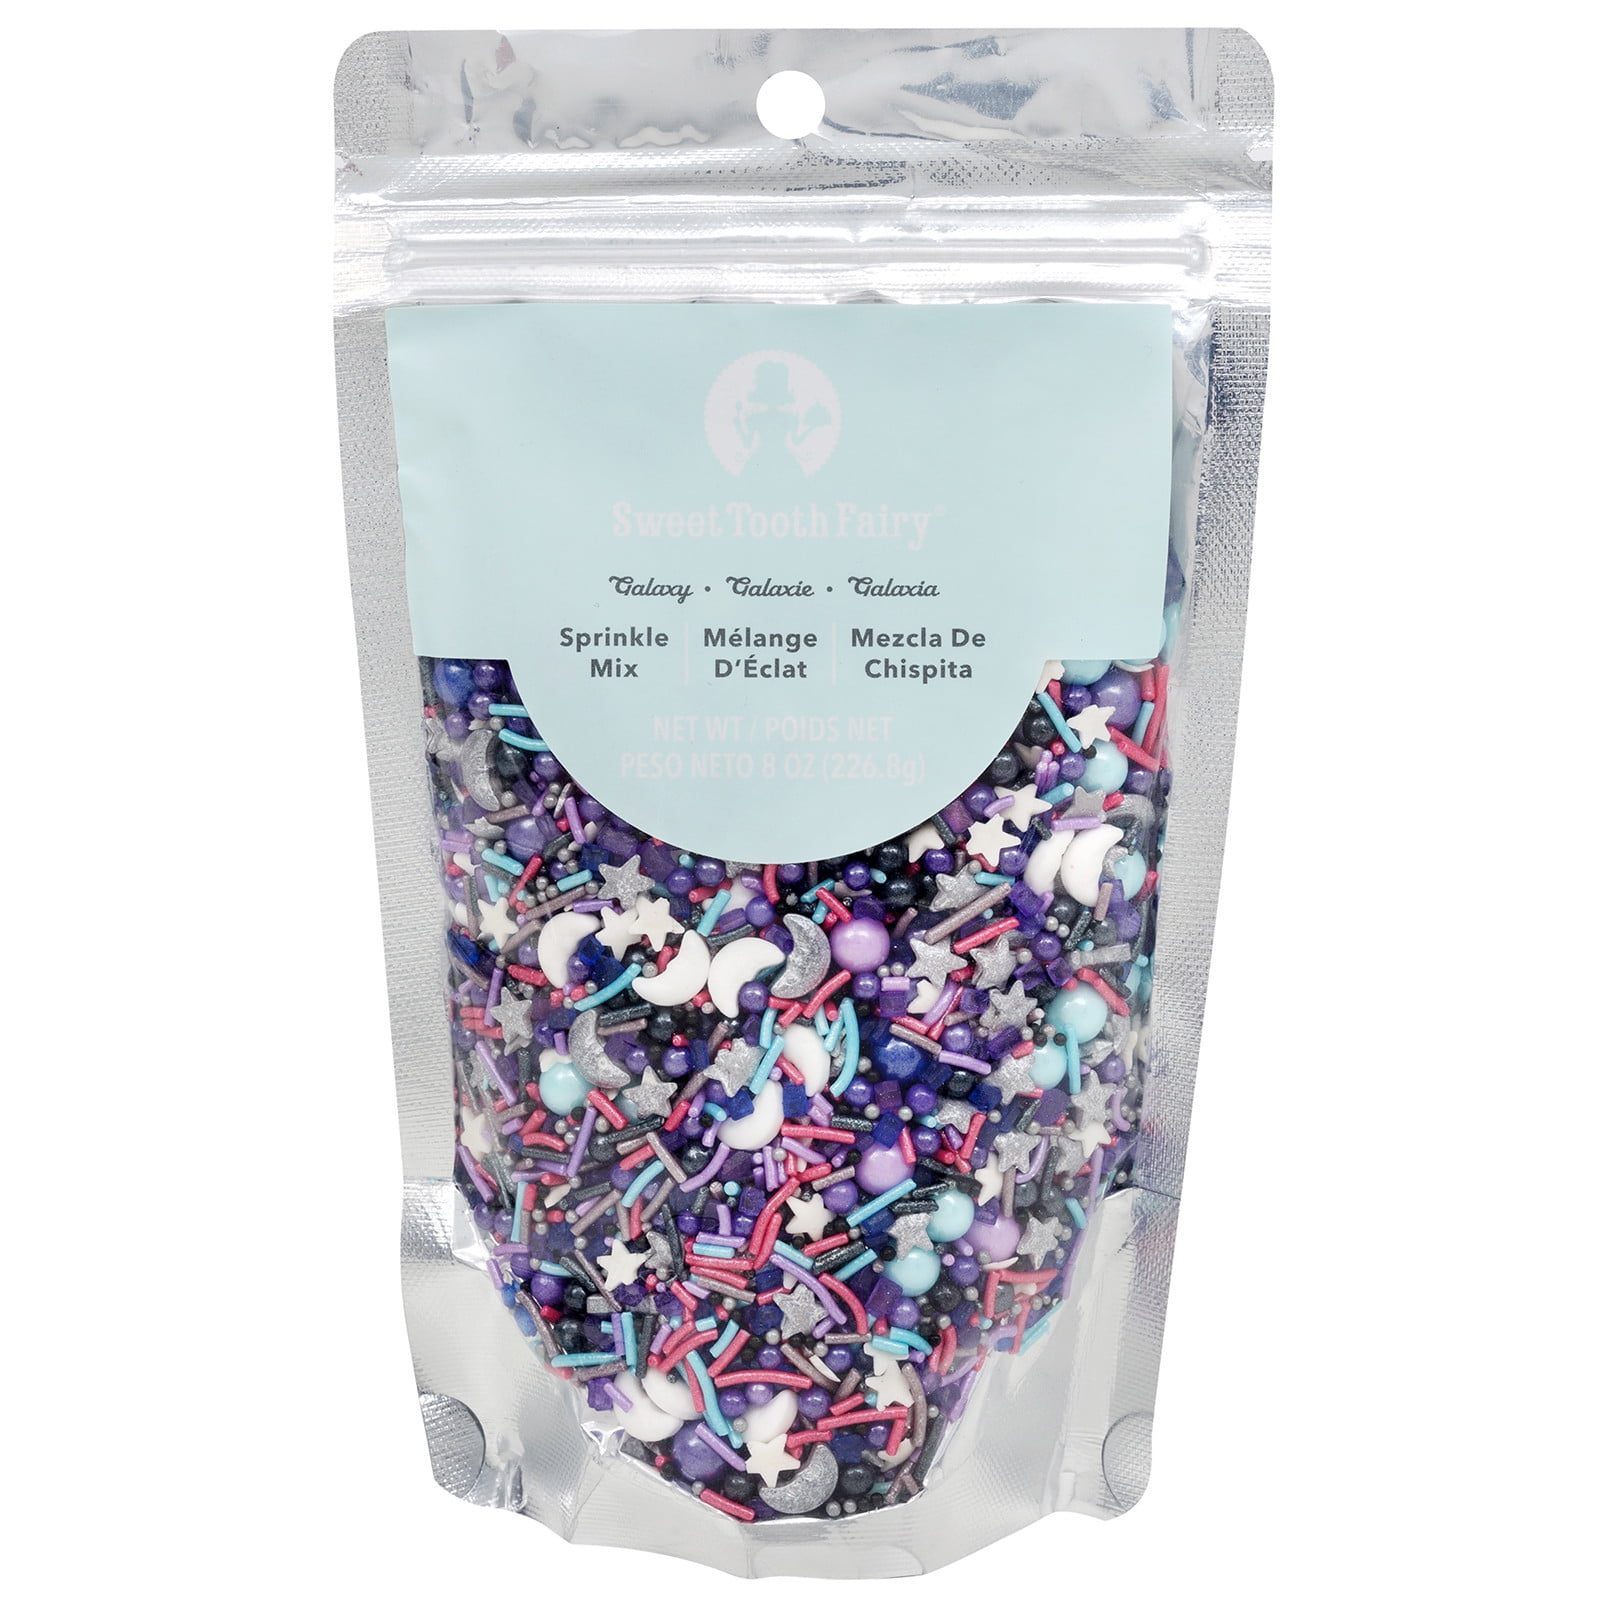 Sweet Tooth Fairy® Blue & White Shimmer Gumballs, 7oz.